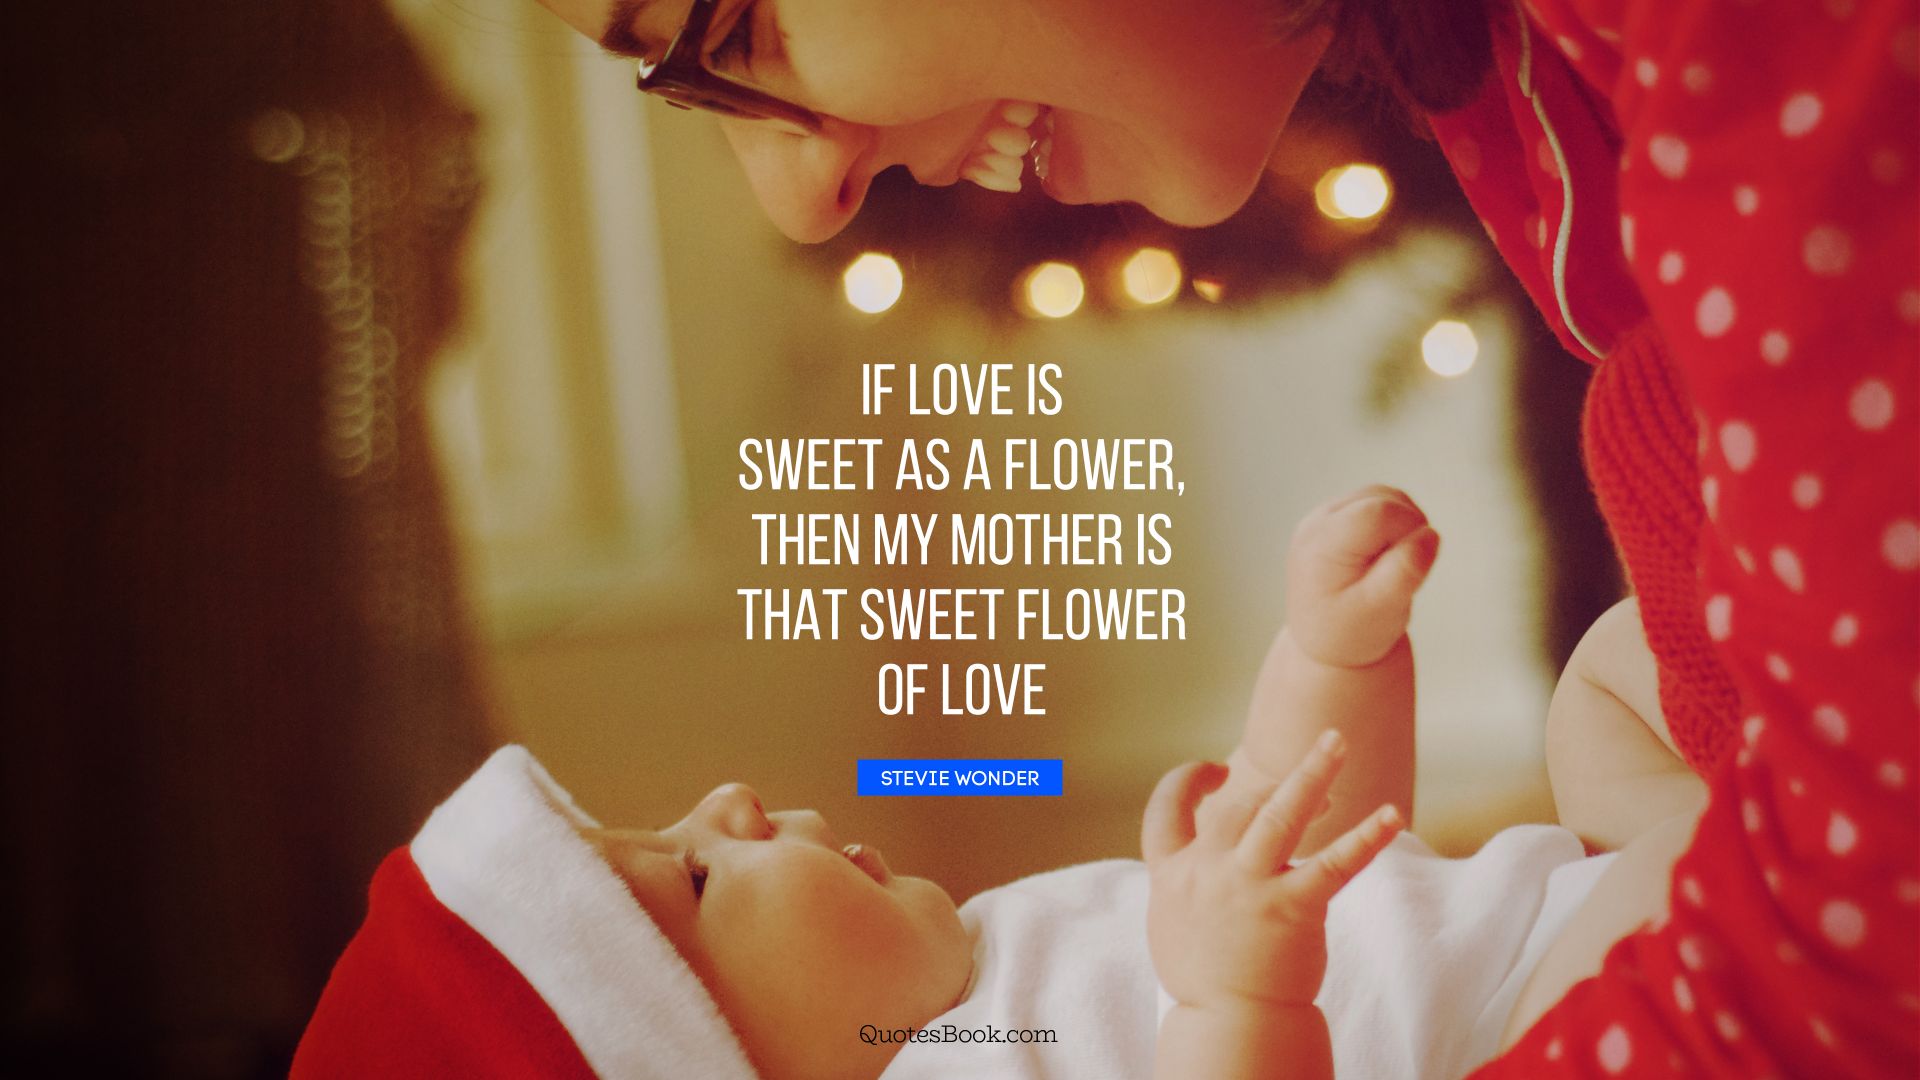 If love is sweet as a flower, then my mother is that sweet flower of love. - Quote by Stevie Wonder